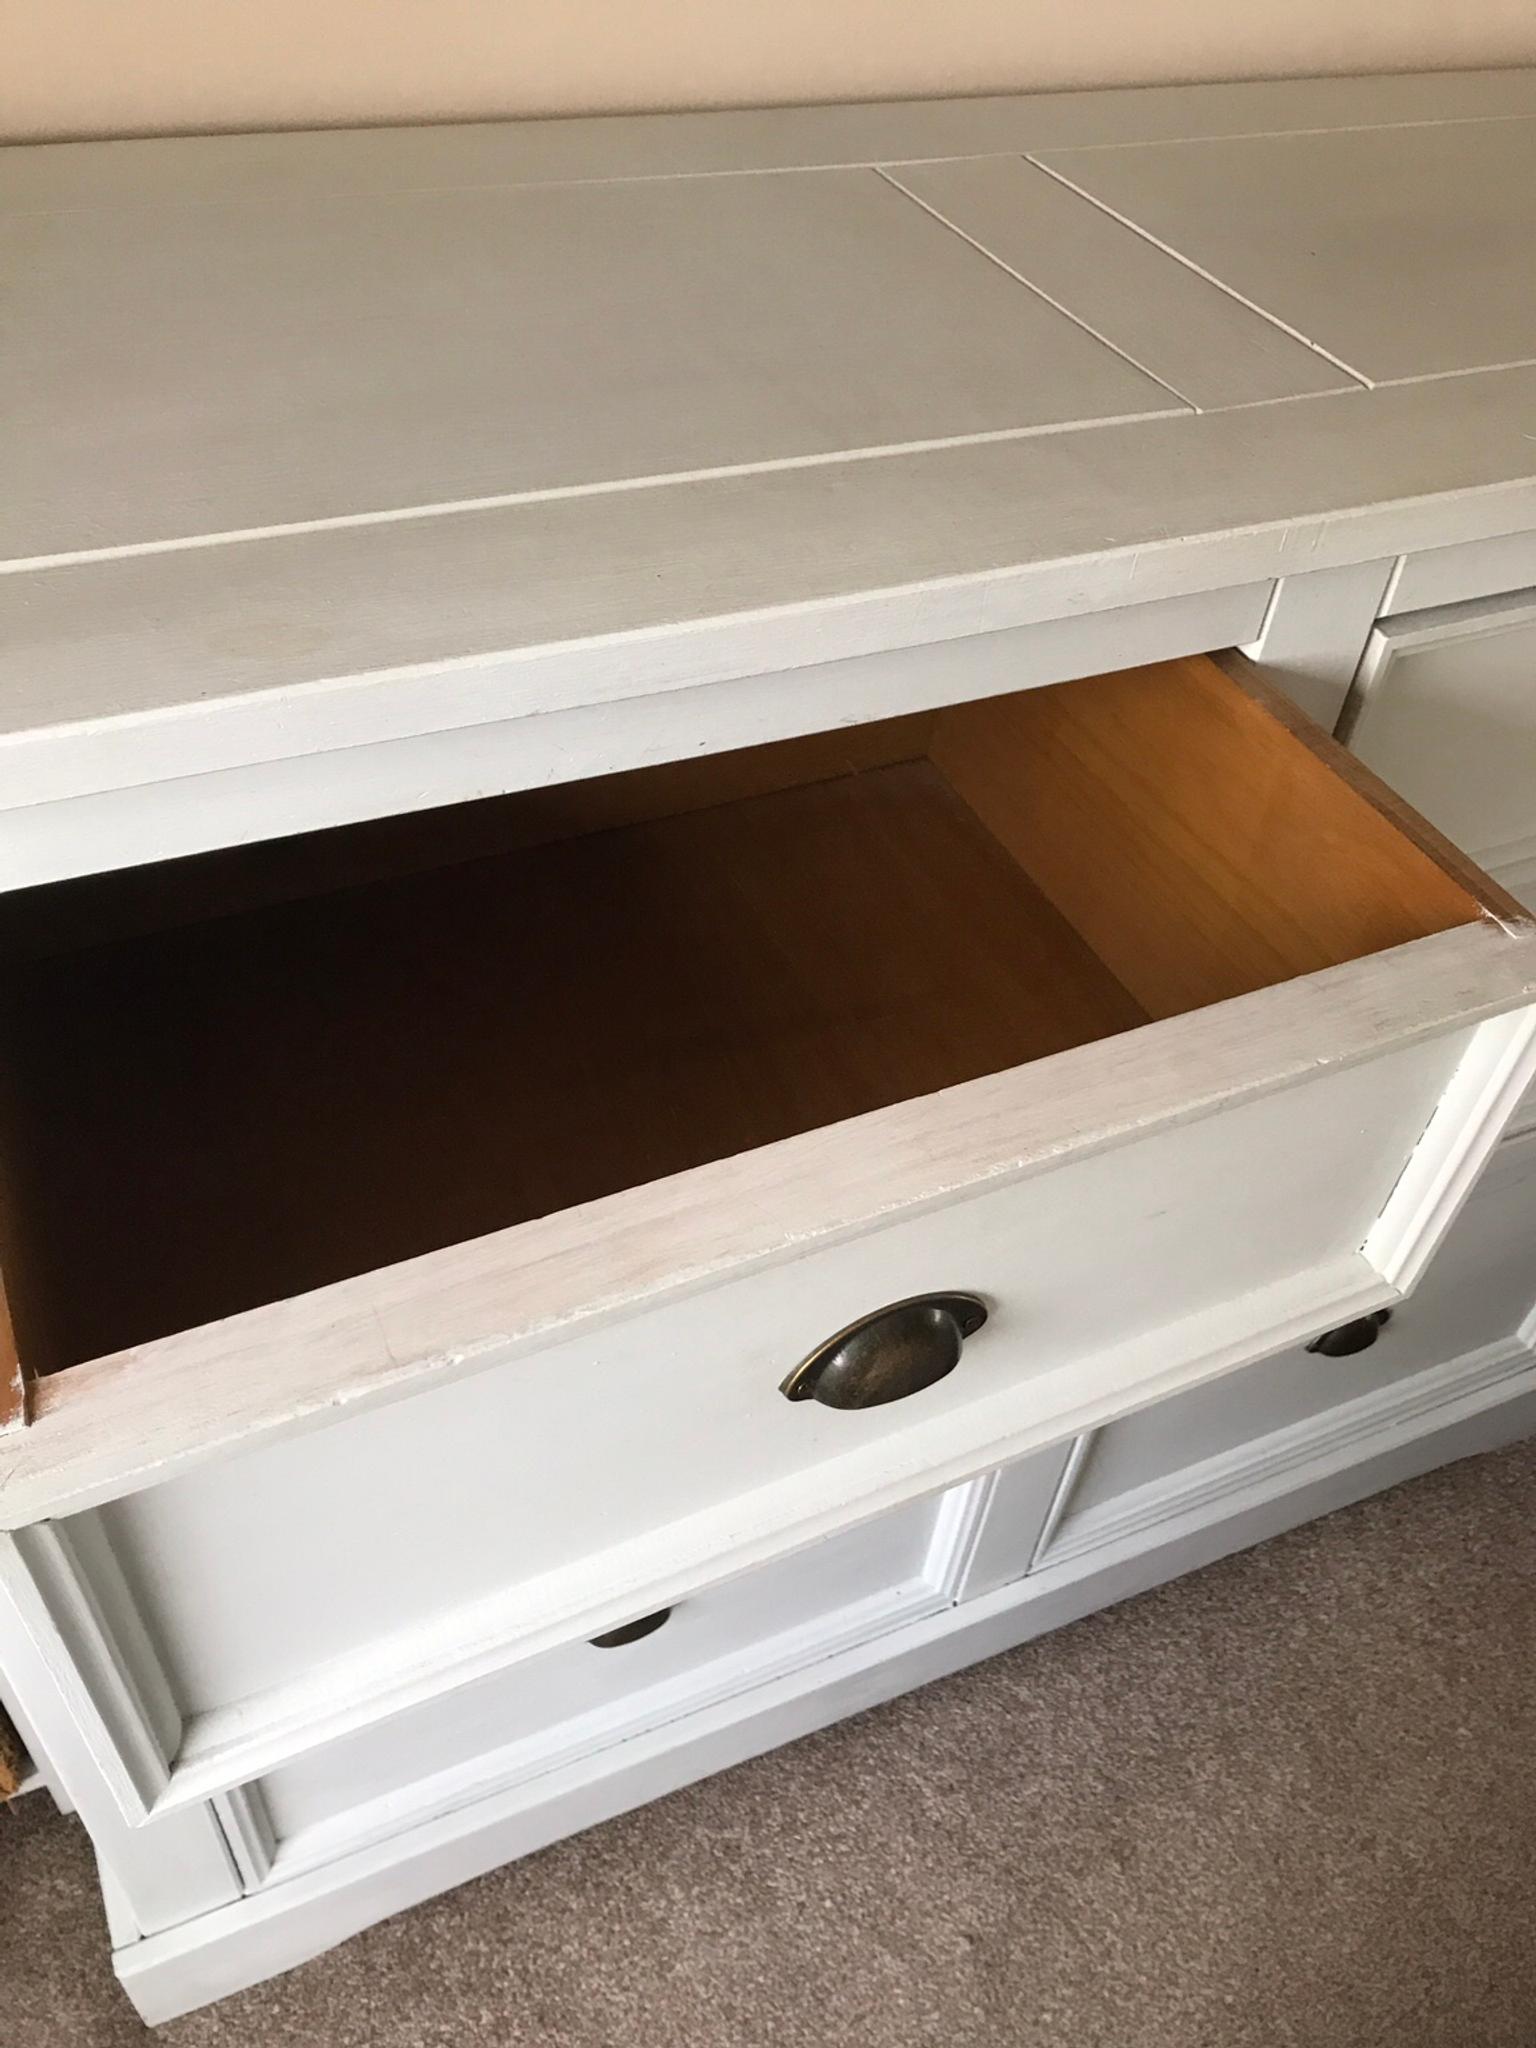 Corona Painted 6 Drawer Wide Chest In B73 Birmingham For 55 00